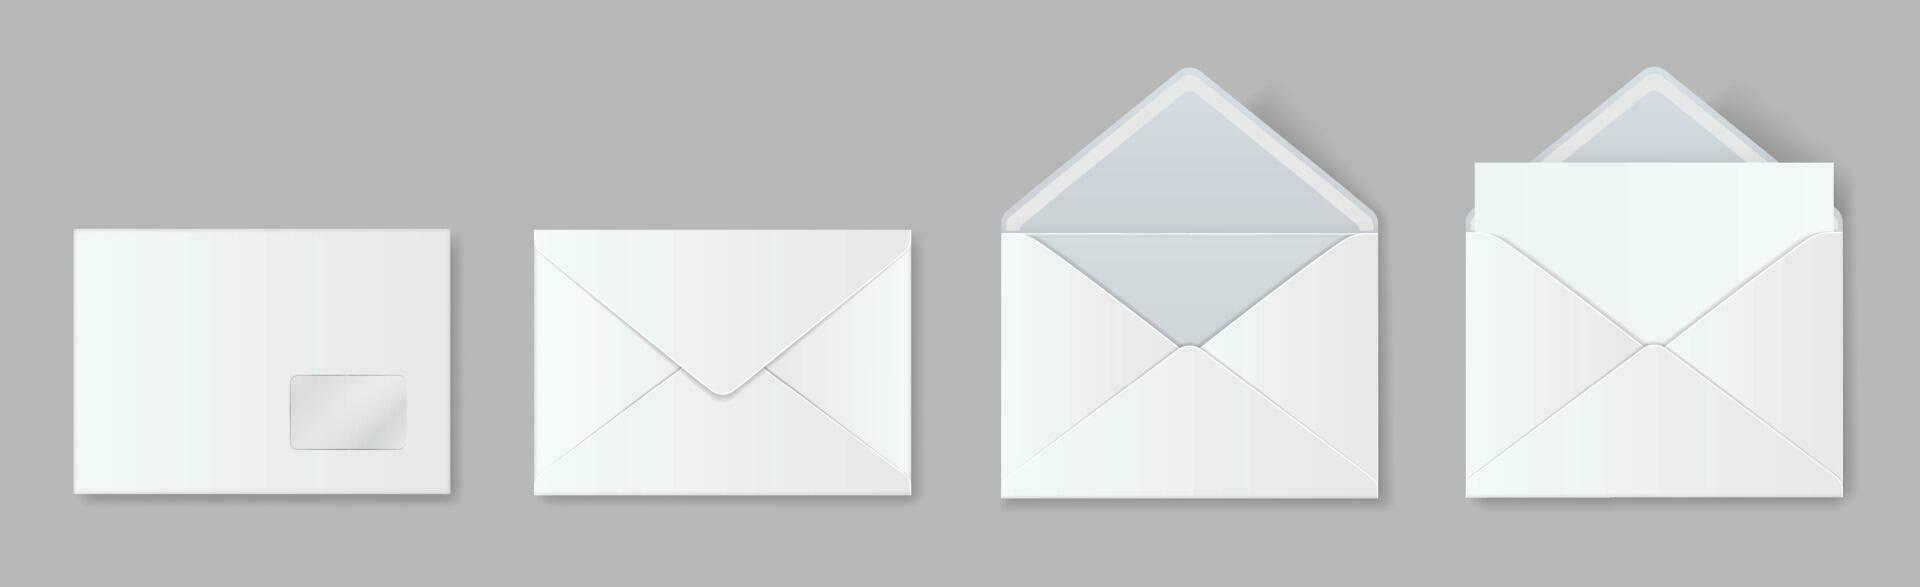 Realistic blank white envelope mockup, open and closed envelopes. Postal letter invitation, paper mail template front and back view vector set